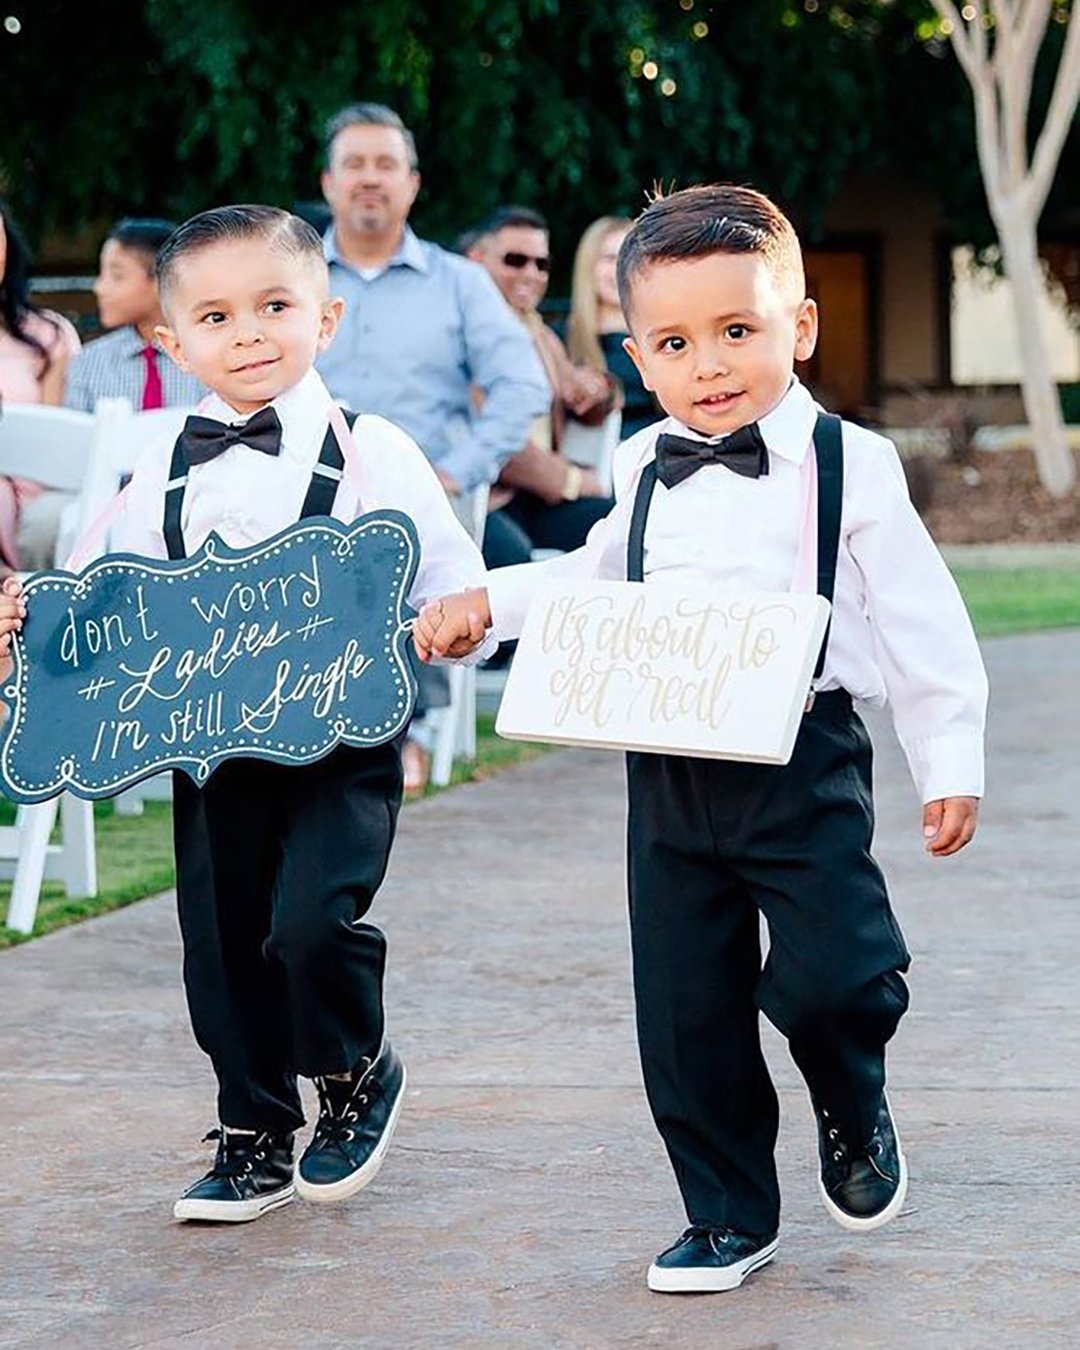 must have wedding photos boys with poster marlenasphotography